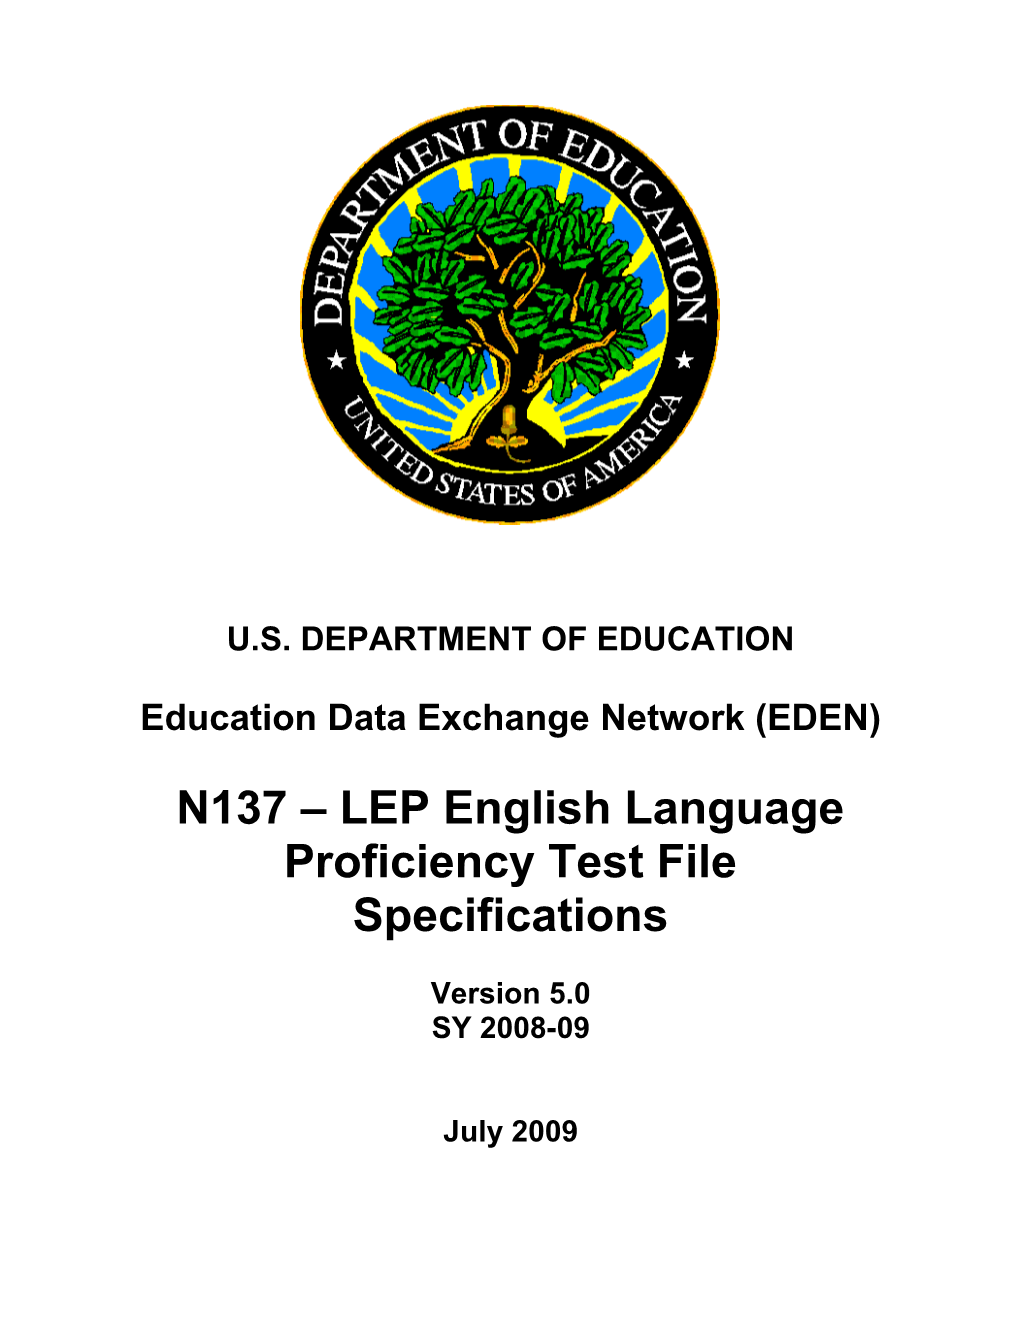 N137 LEP English Language Proficiency Test File Specifications (MS Word)